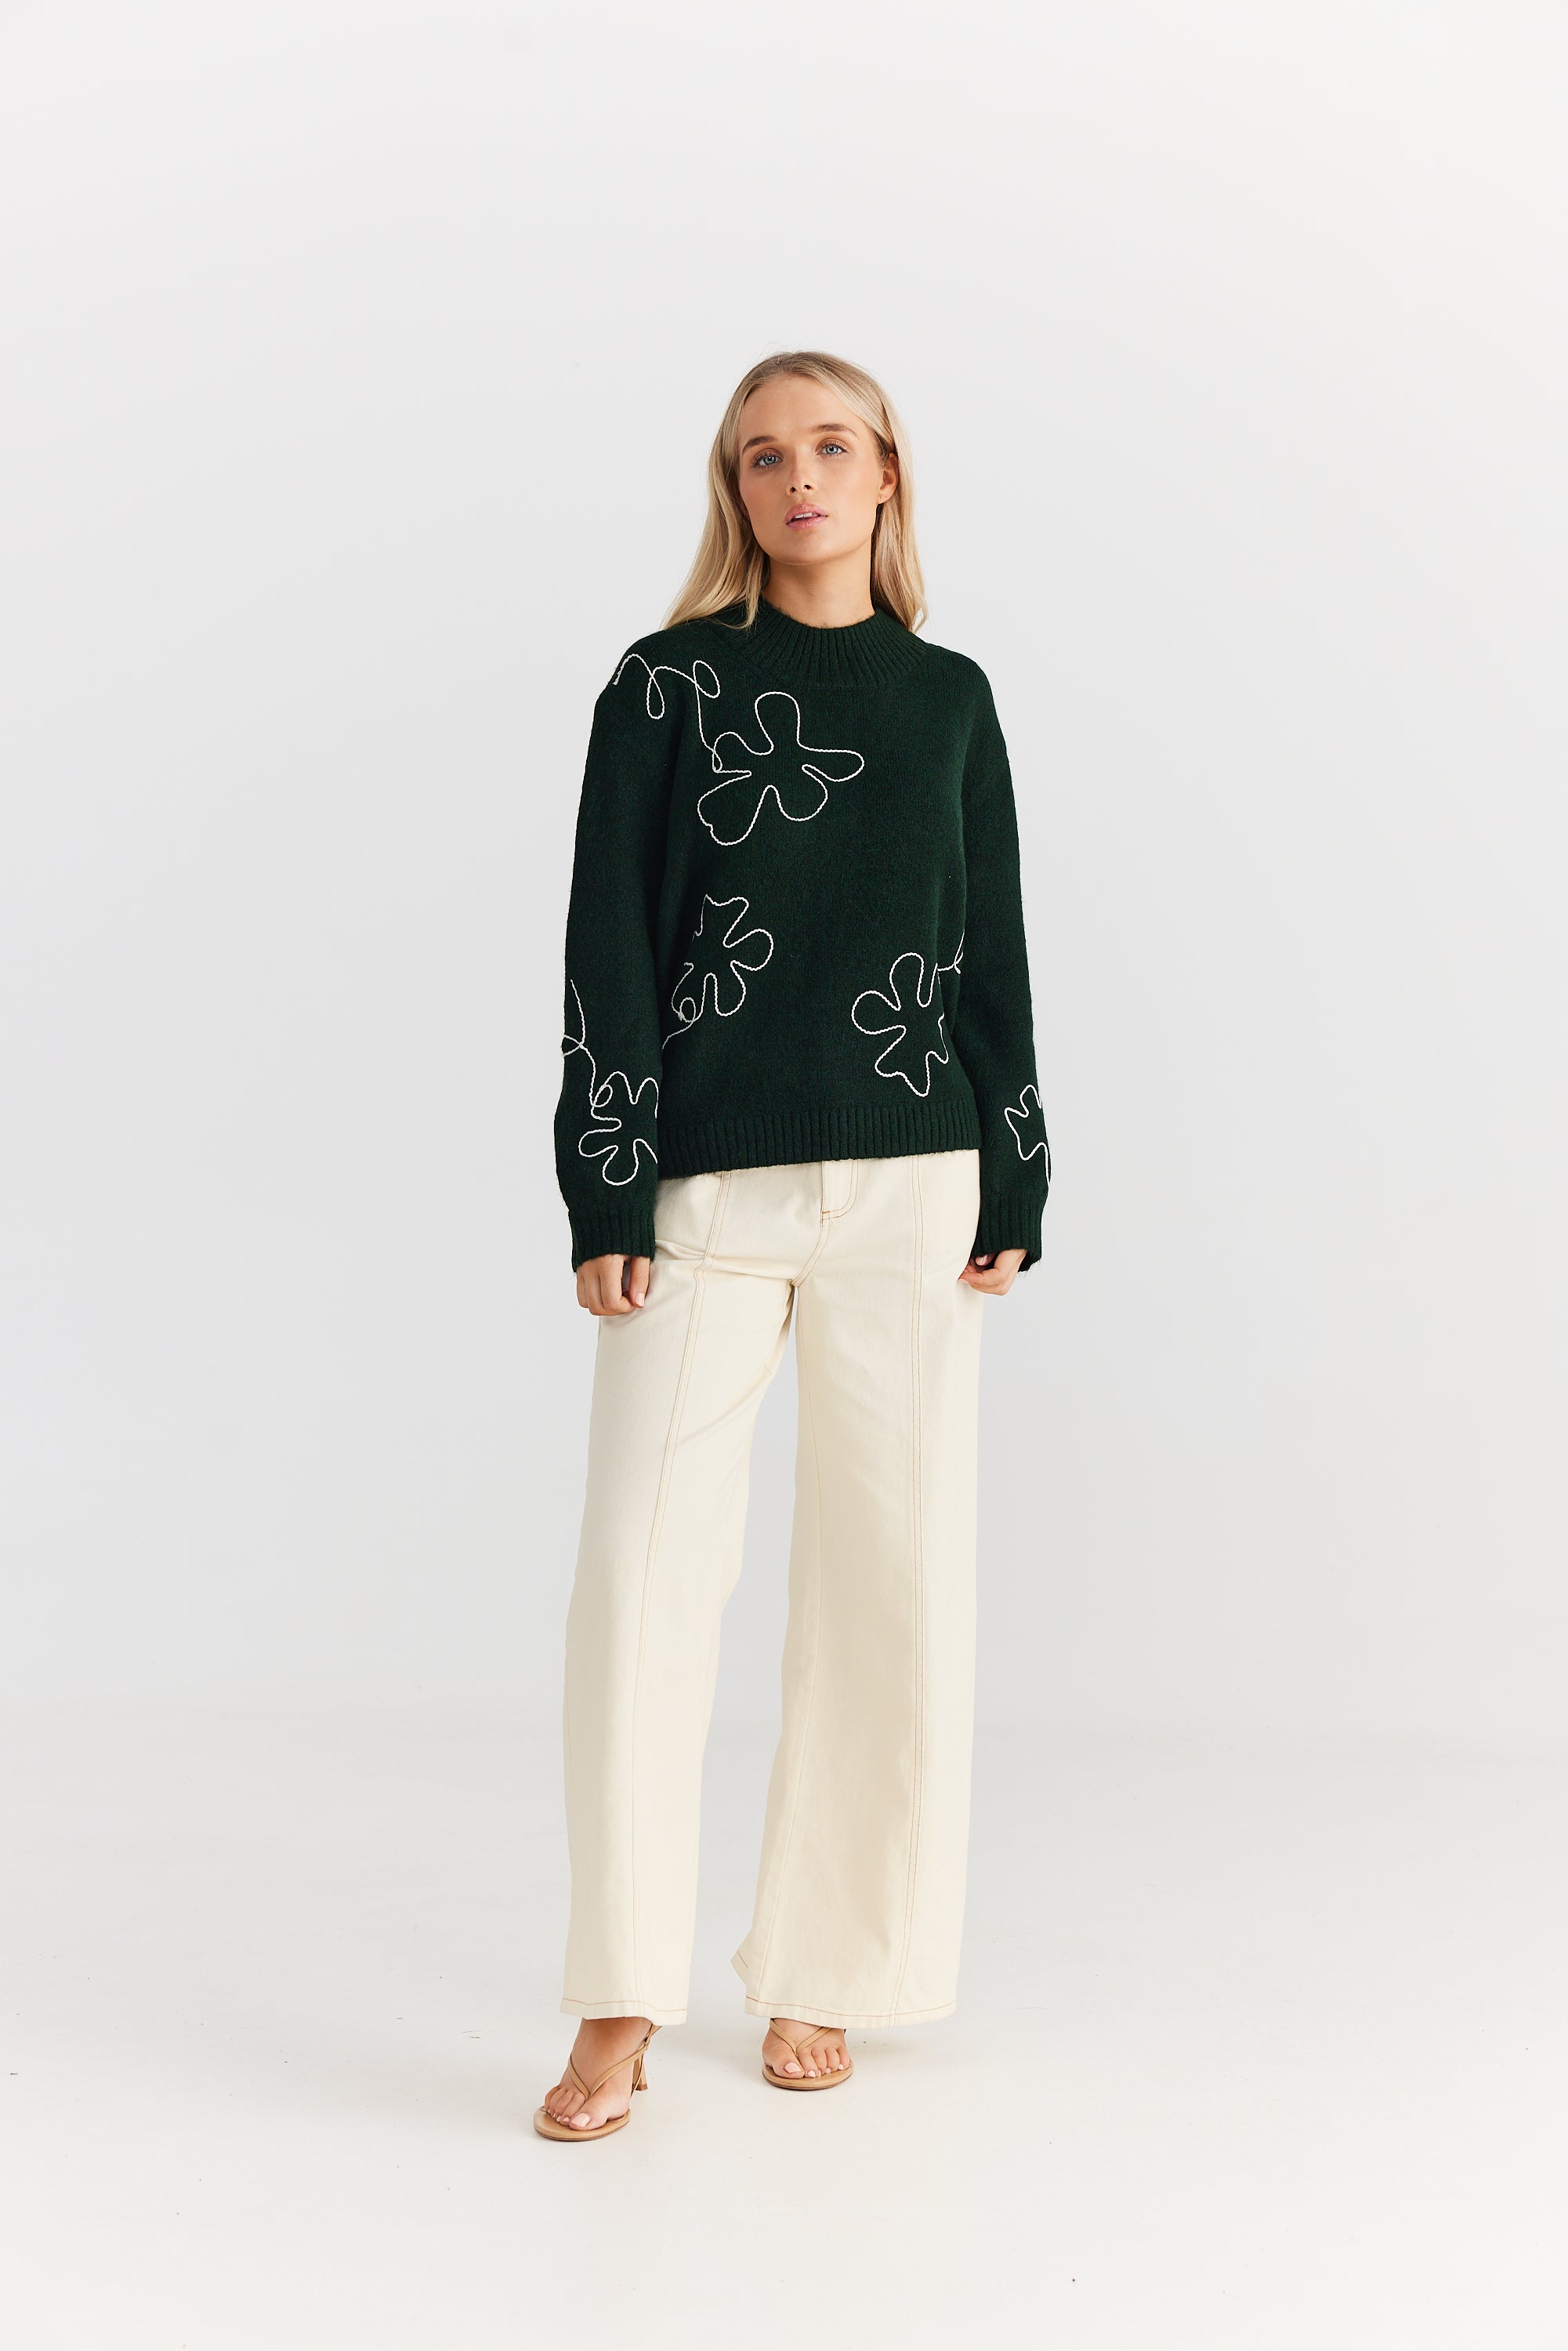 Bloom Knit - Forest-Knitwear & Jumpers-Daisy Says-The Bay Room